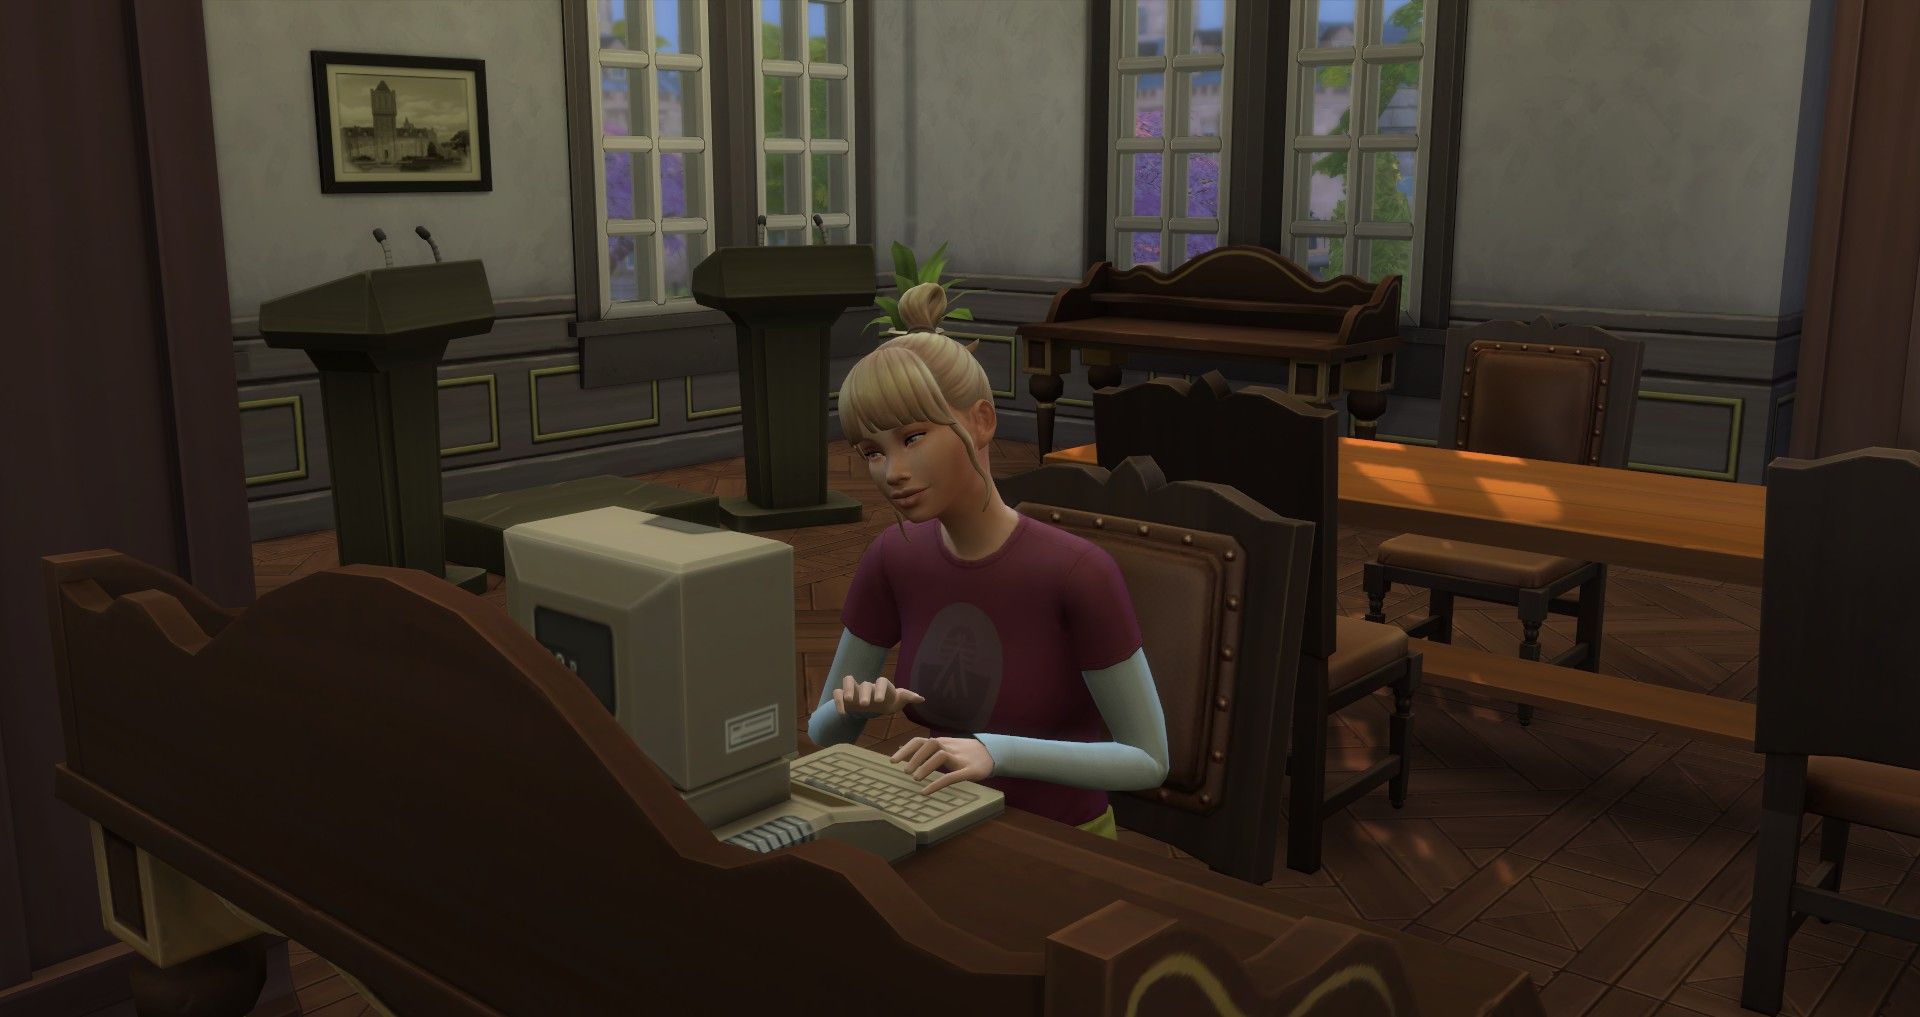 sims 4 research paper